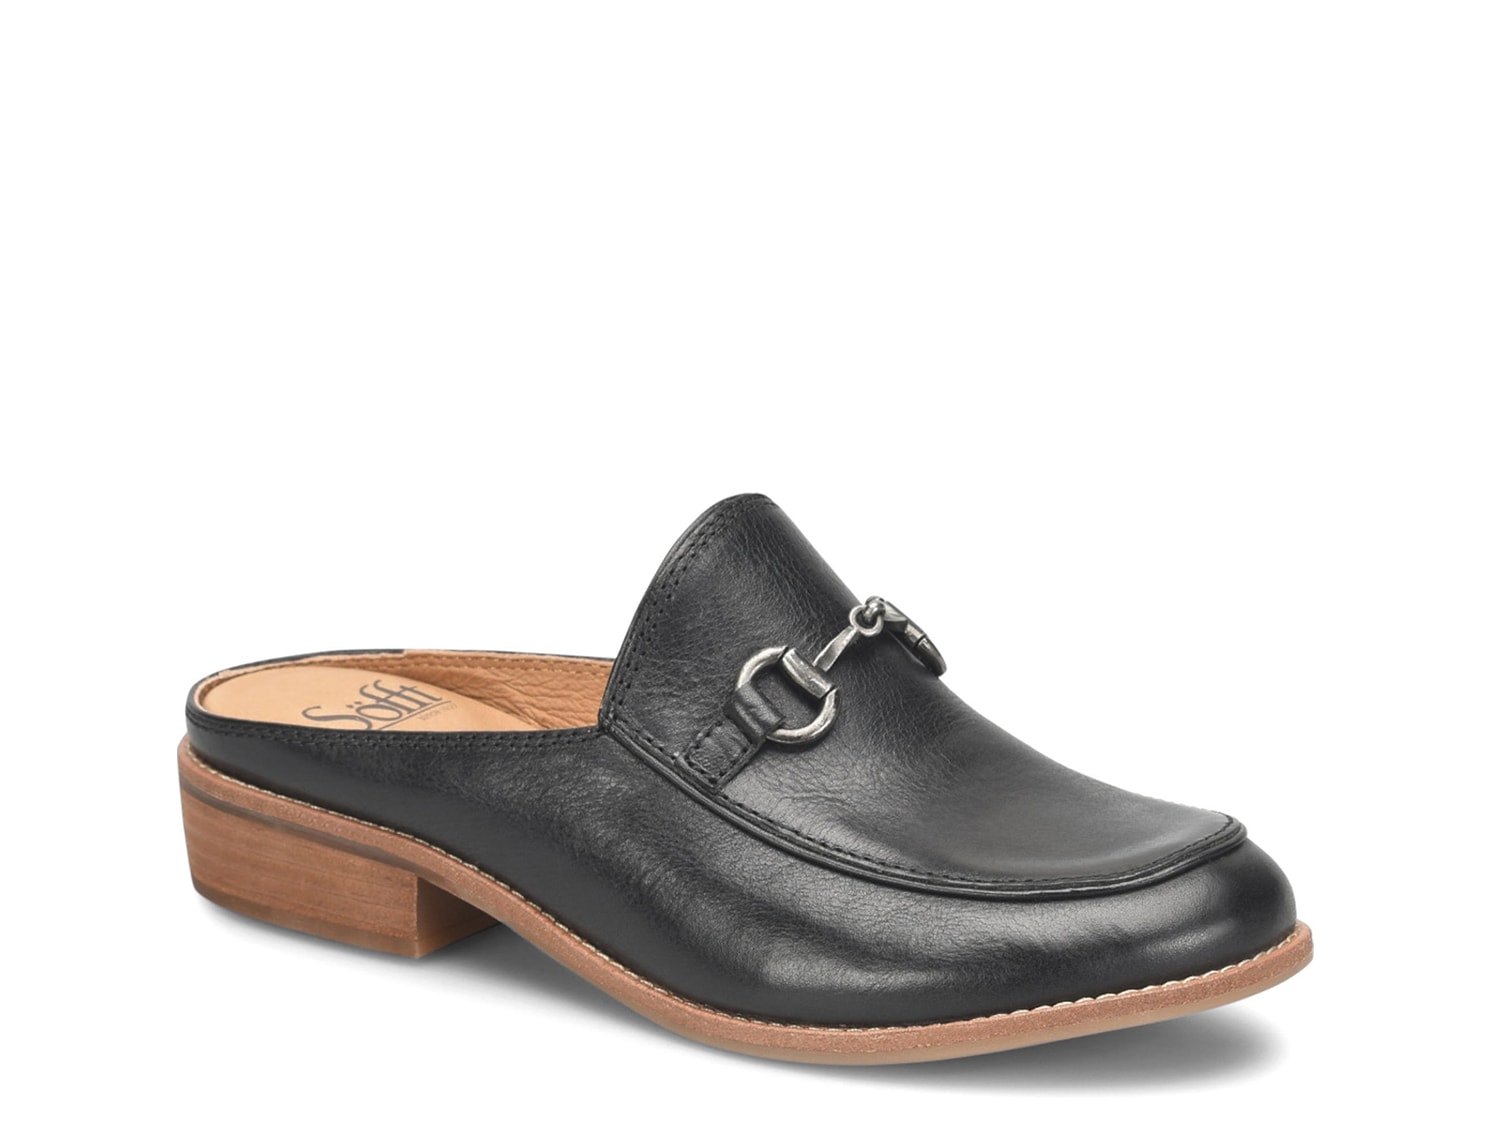 Sofft Naoko Mule - Free Shipping | DSW